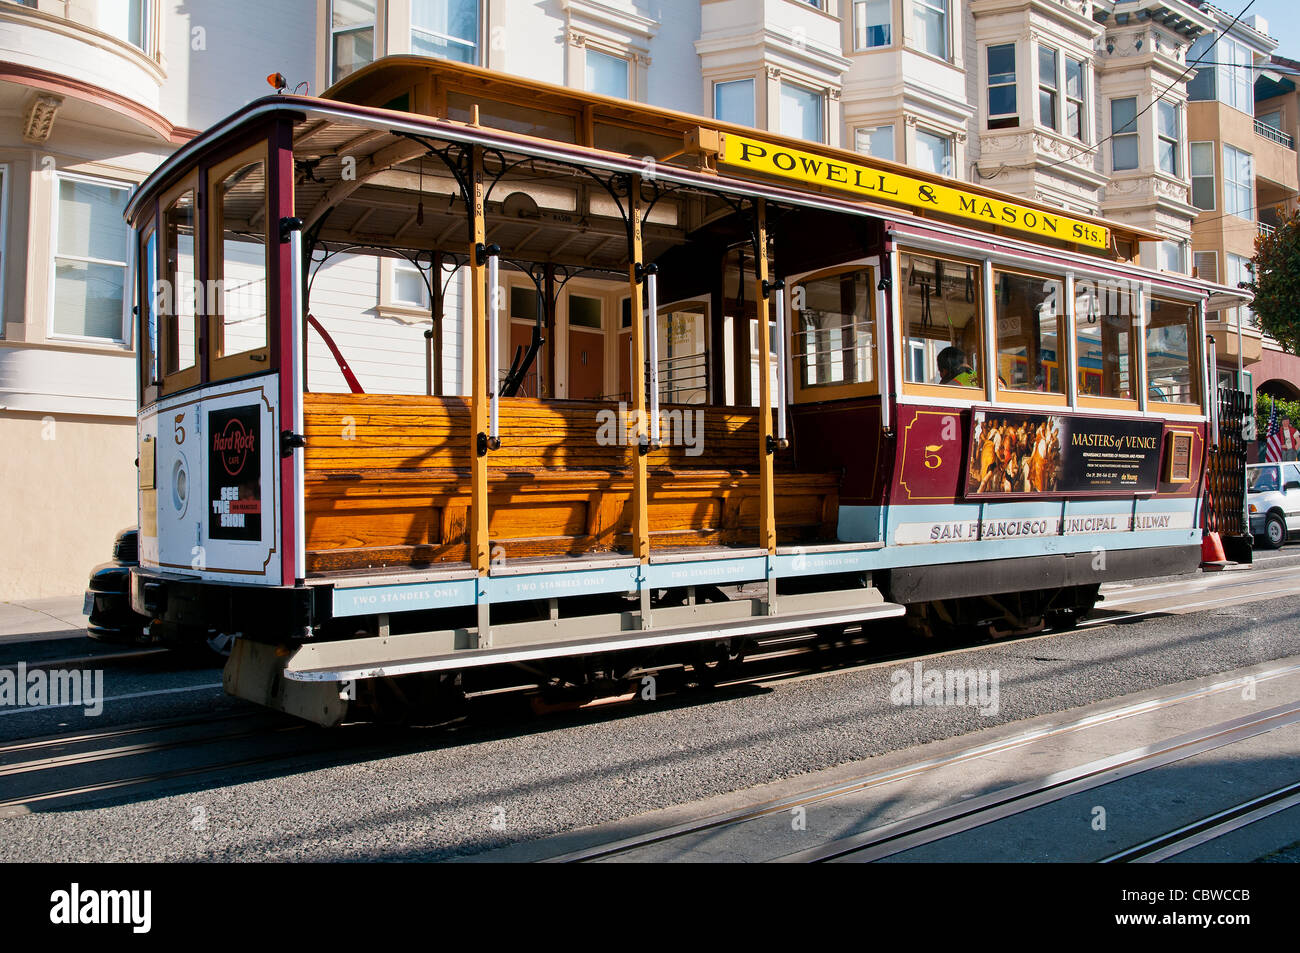 Powell and Mason cable car with no people on board, San Francisco, California, USA Stock Photo